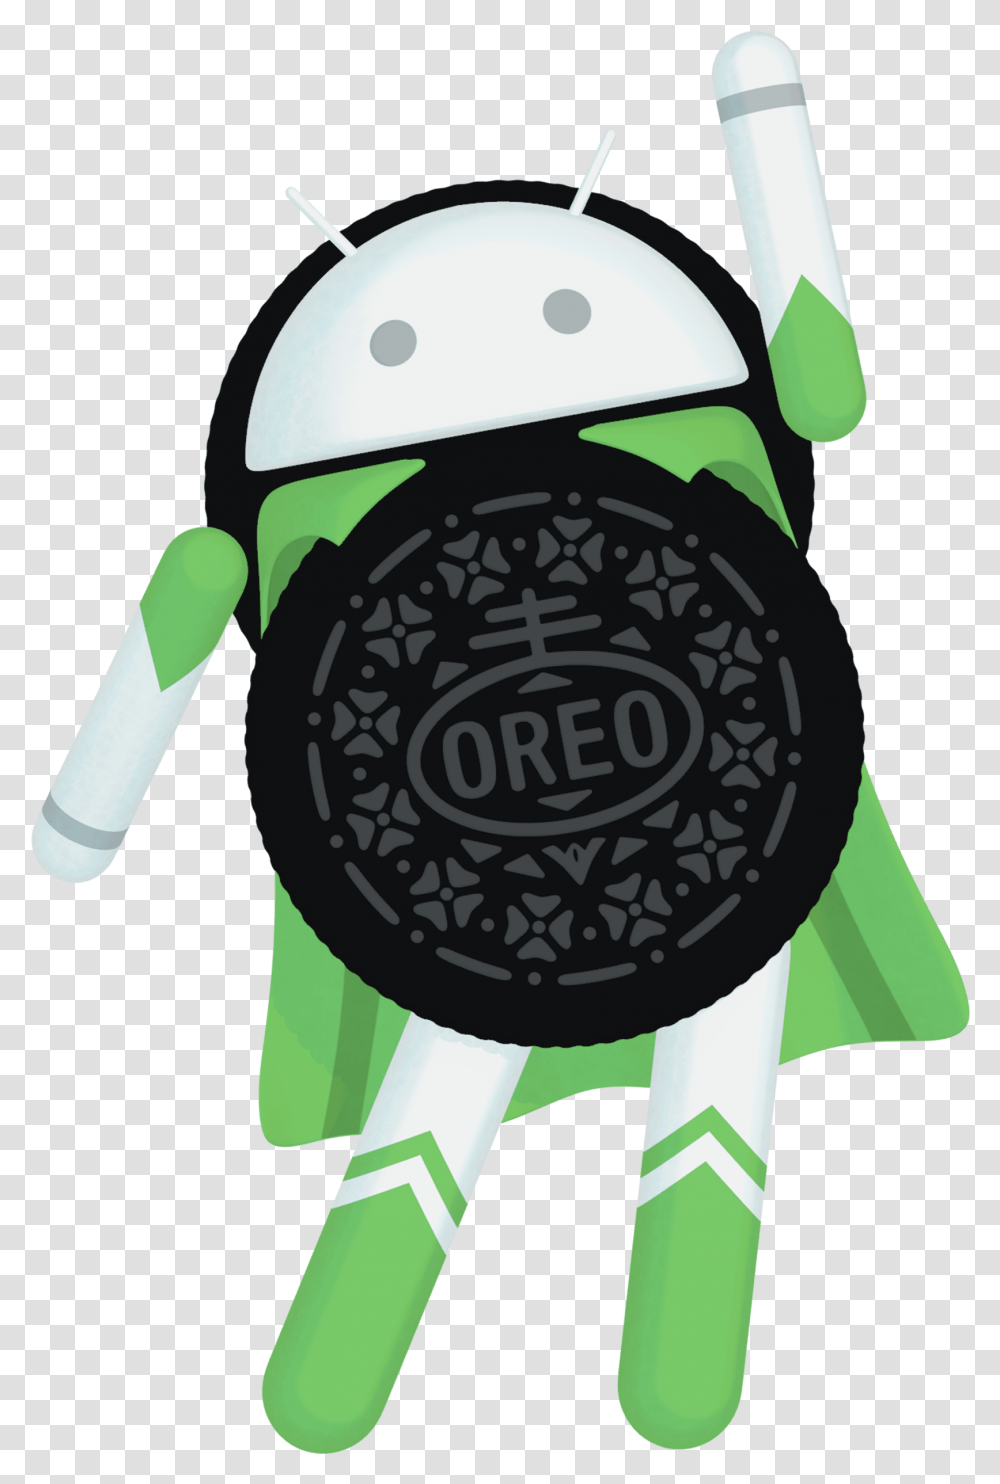 Android Oreo Logos Android Oreo Logo, Armor, Helmet, Clothing, Apparel Transparent Png